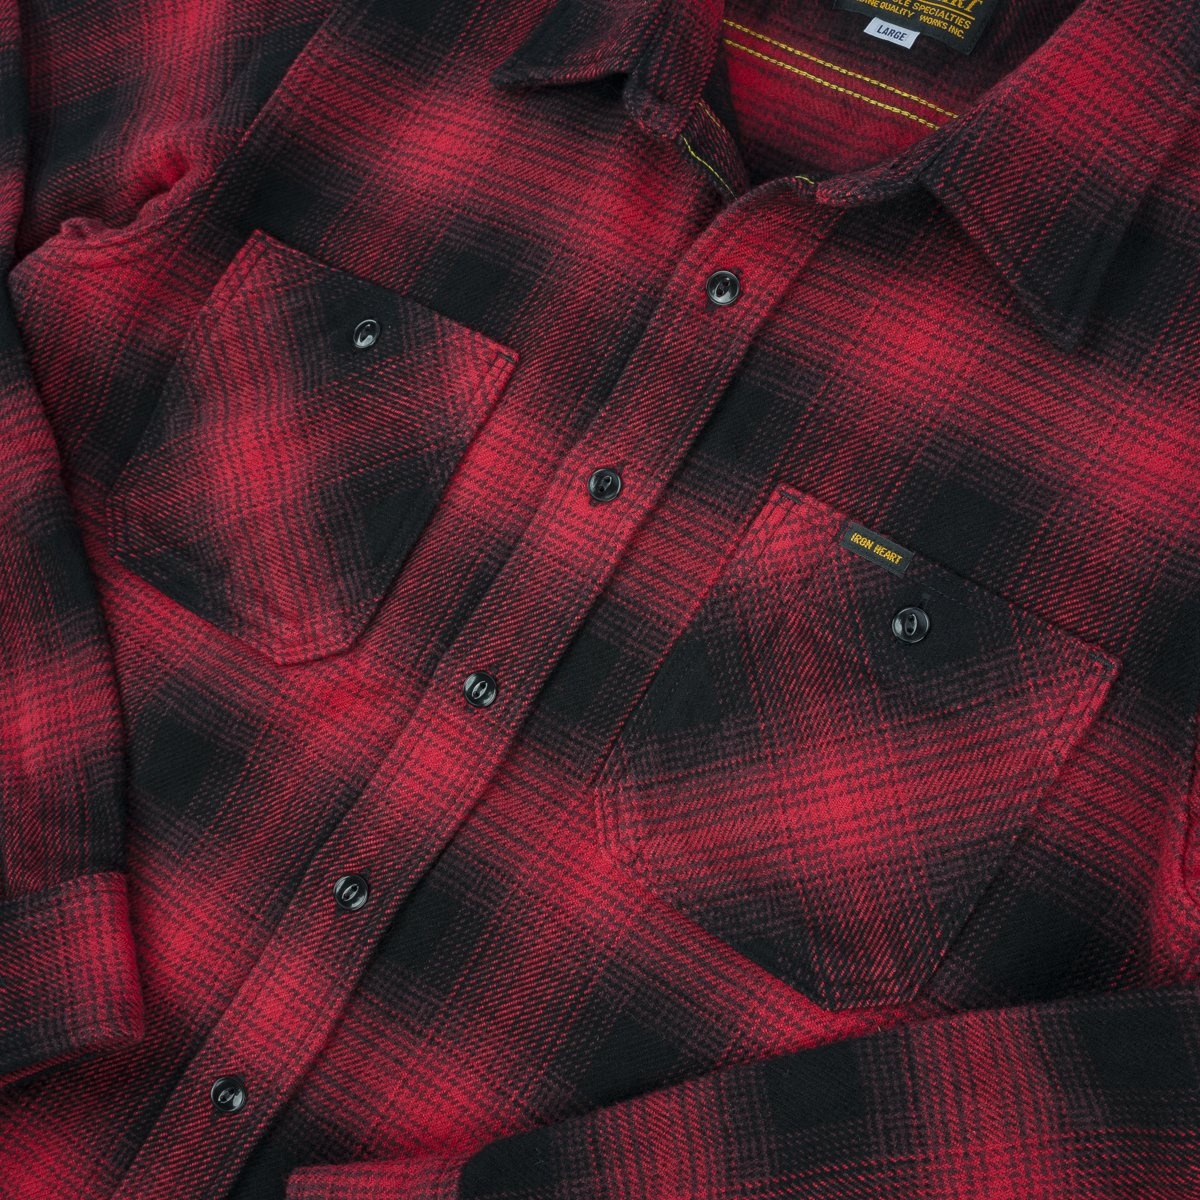 IHSH-265-RED Ultra Heavy Flannel Ombré Check Work Shirt - Red/Black - 9